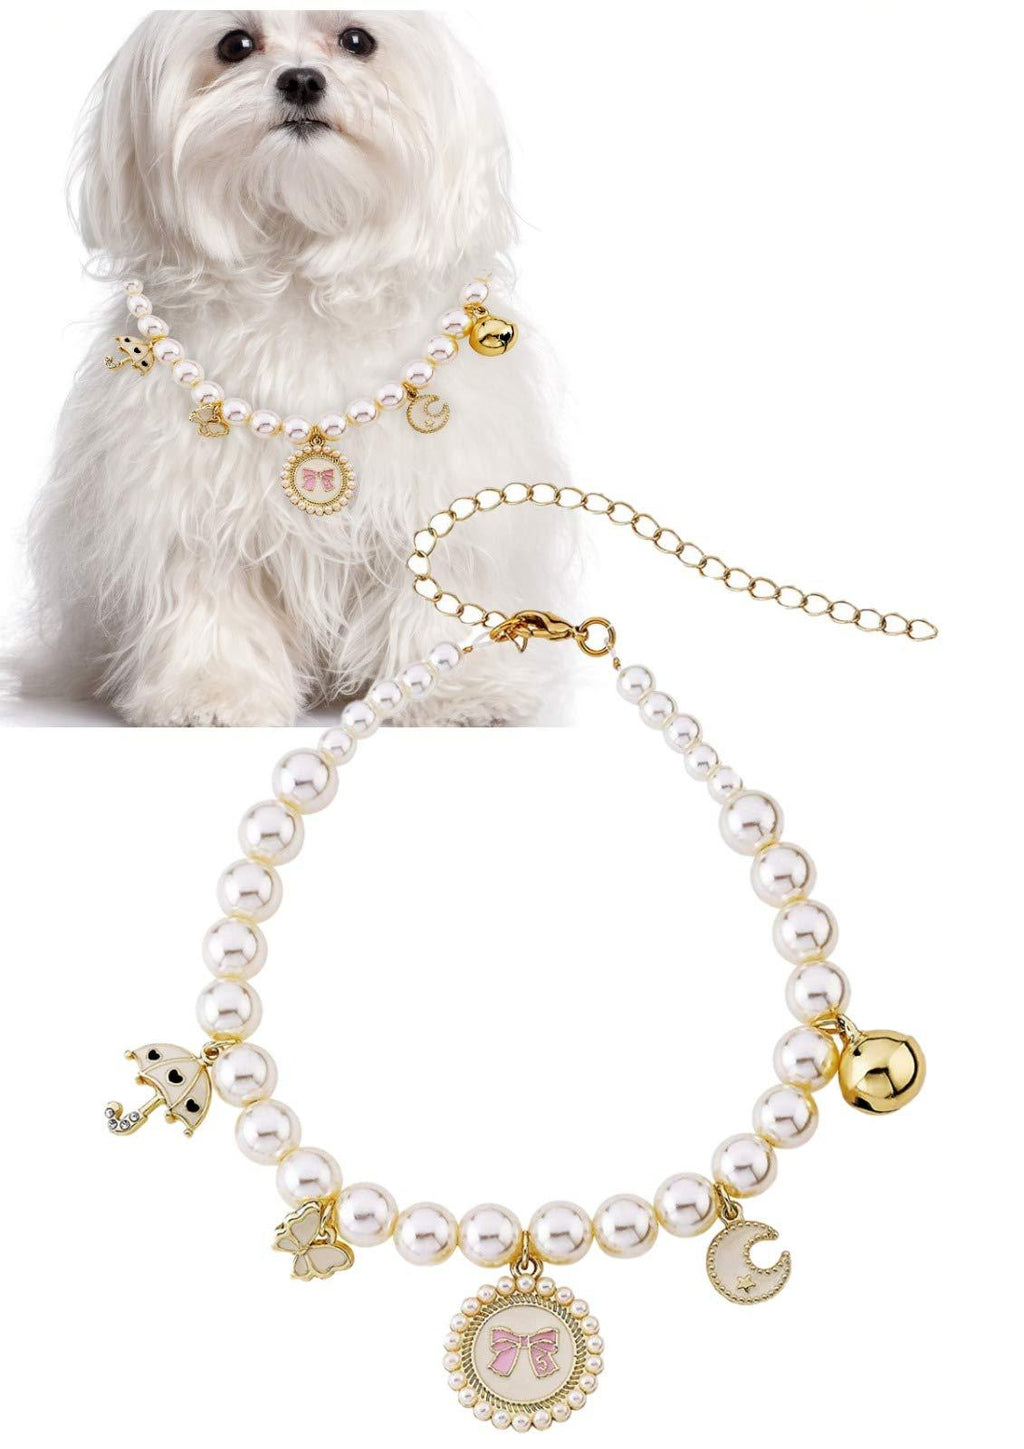 [Australia] - Pearl and Whimsical Charms Pet Necklace - 28 cm with 10 cm Extender - Small Accessory Fits Chihuahua, Yorkie, Mini Breeds - Cute Pet Jewelry and Accessories - by Posh Petz 